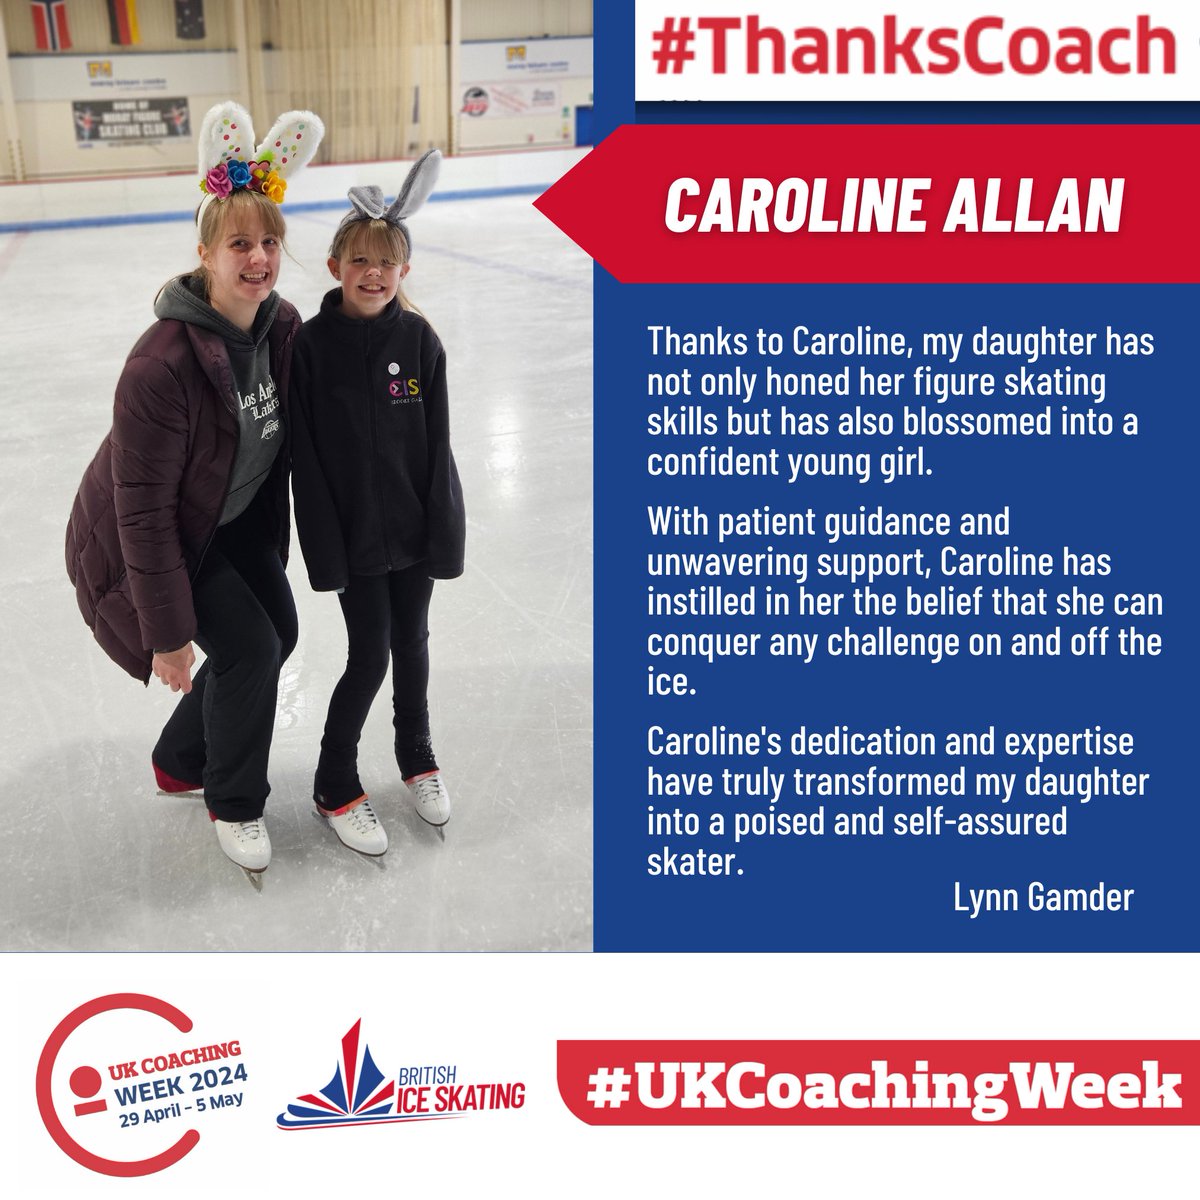 Let's say #ThanksCoach to Caroline, whose guidance is helping skaters grow in self-belief and confidence!

#ThanksCoach #UKCoachingWeek #CoachingHeroes #MakingADifference #HolisticCoaching